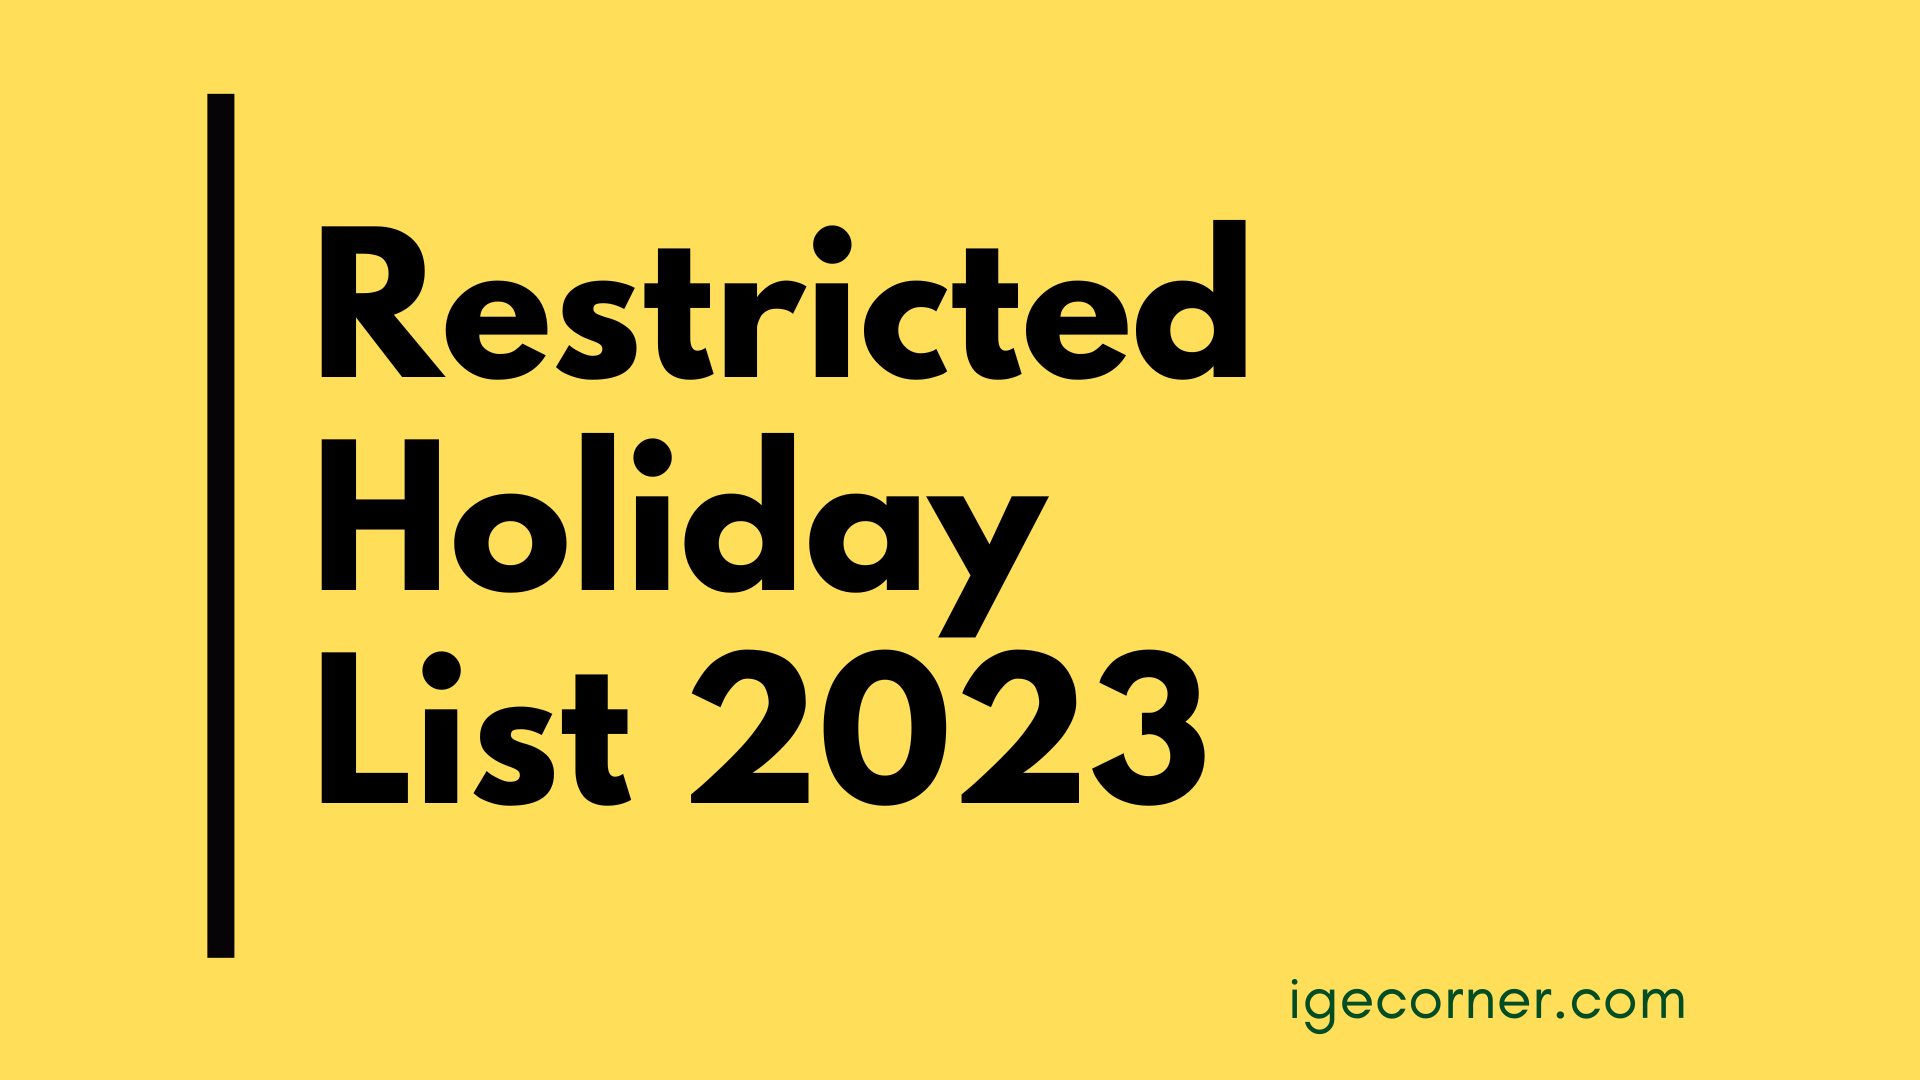 Restricted Holiday 2023 